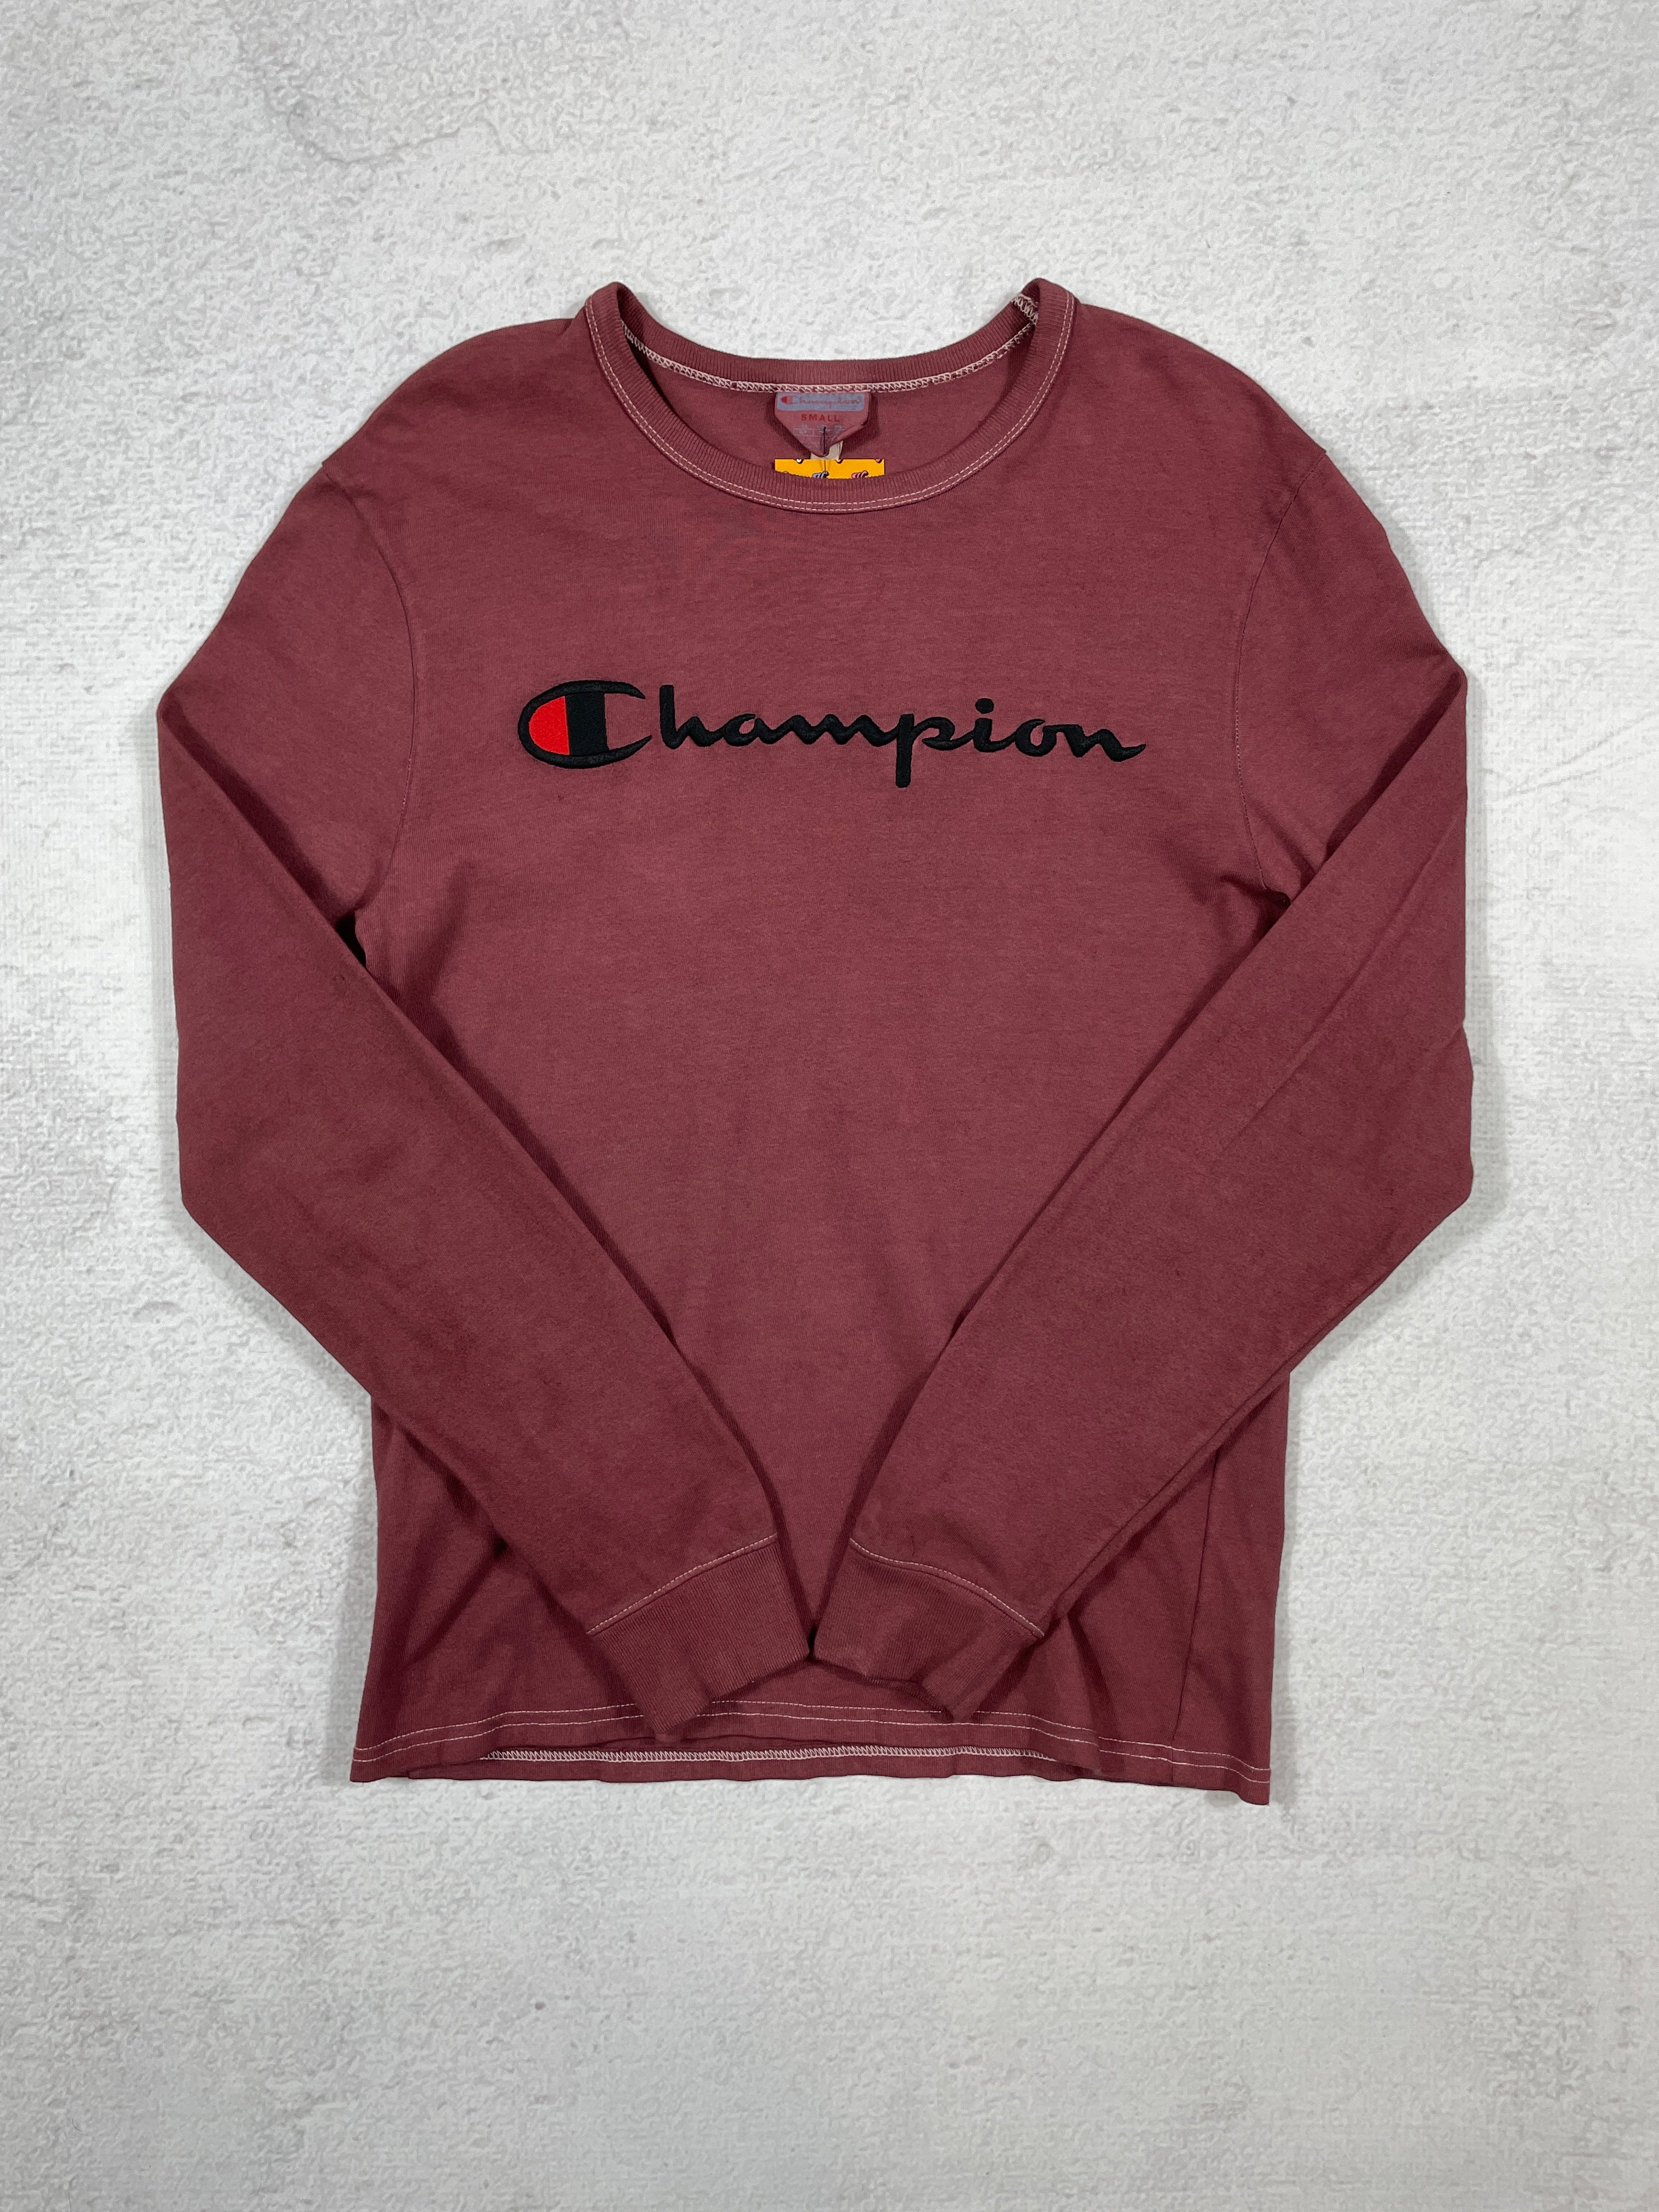 Vintage Dyed Champion Long-Sleeve T-Shirt - Men's Small